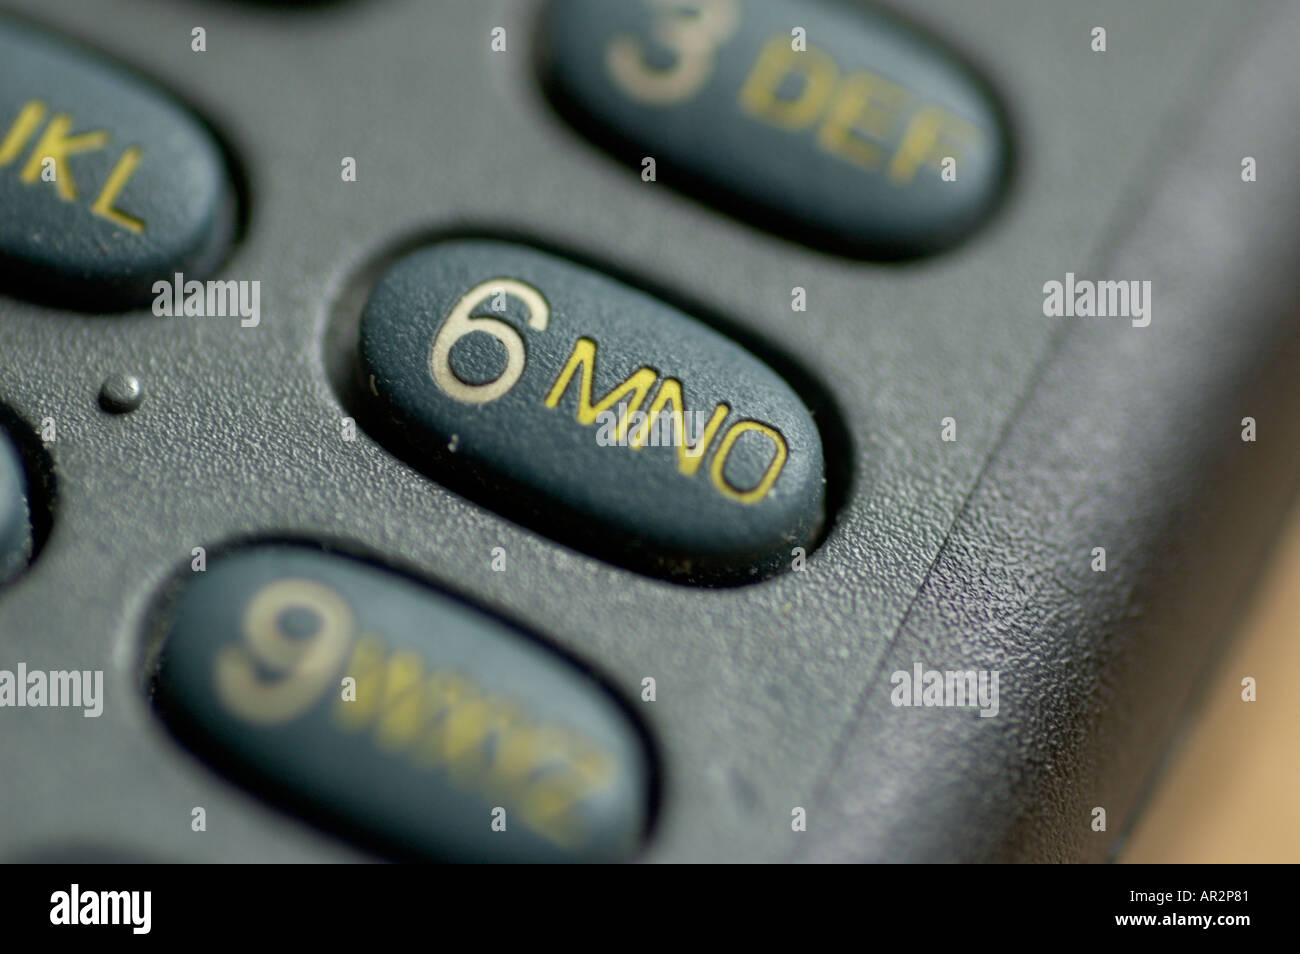 buttons with letters and numbers on a cellular phone. Stock Photo